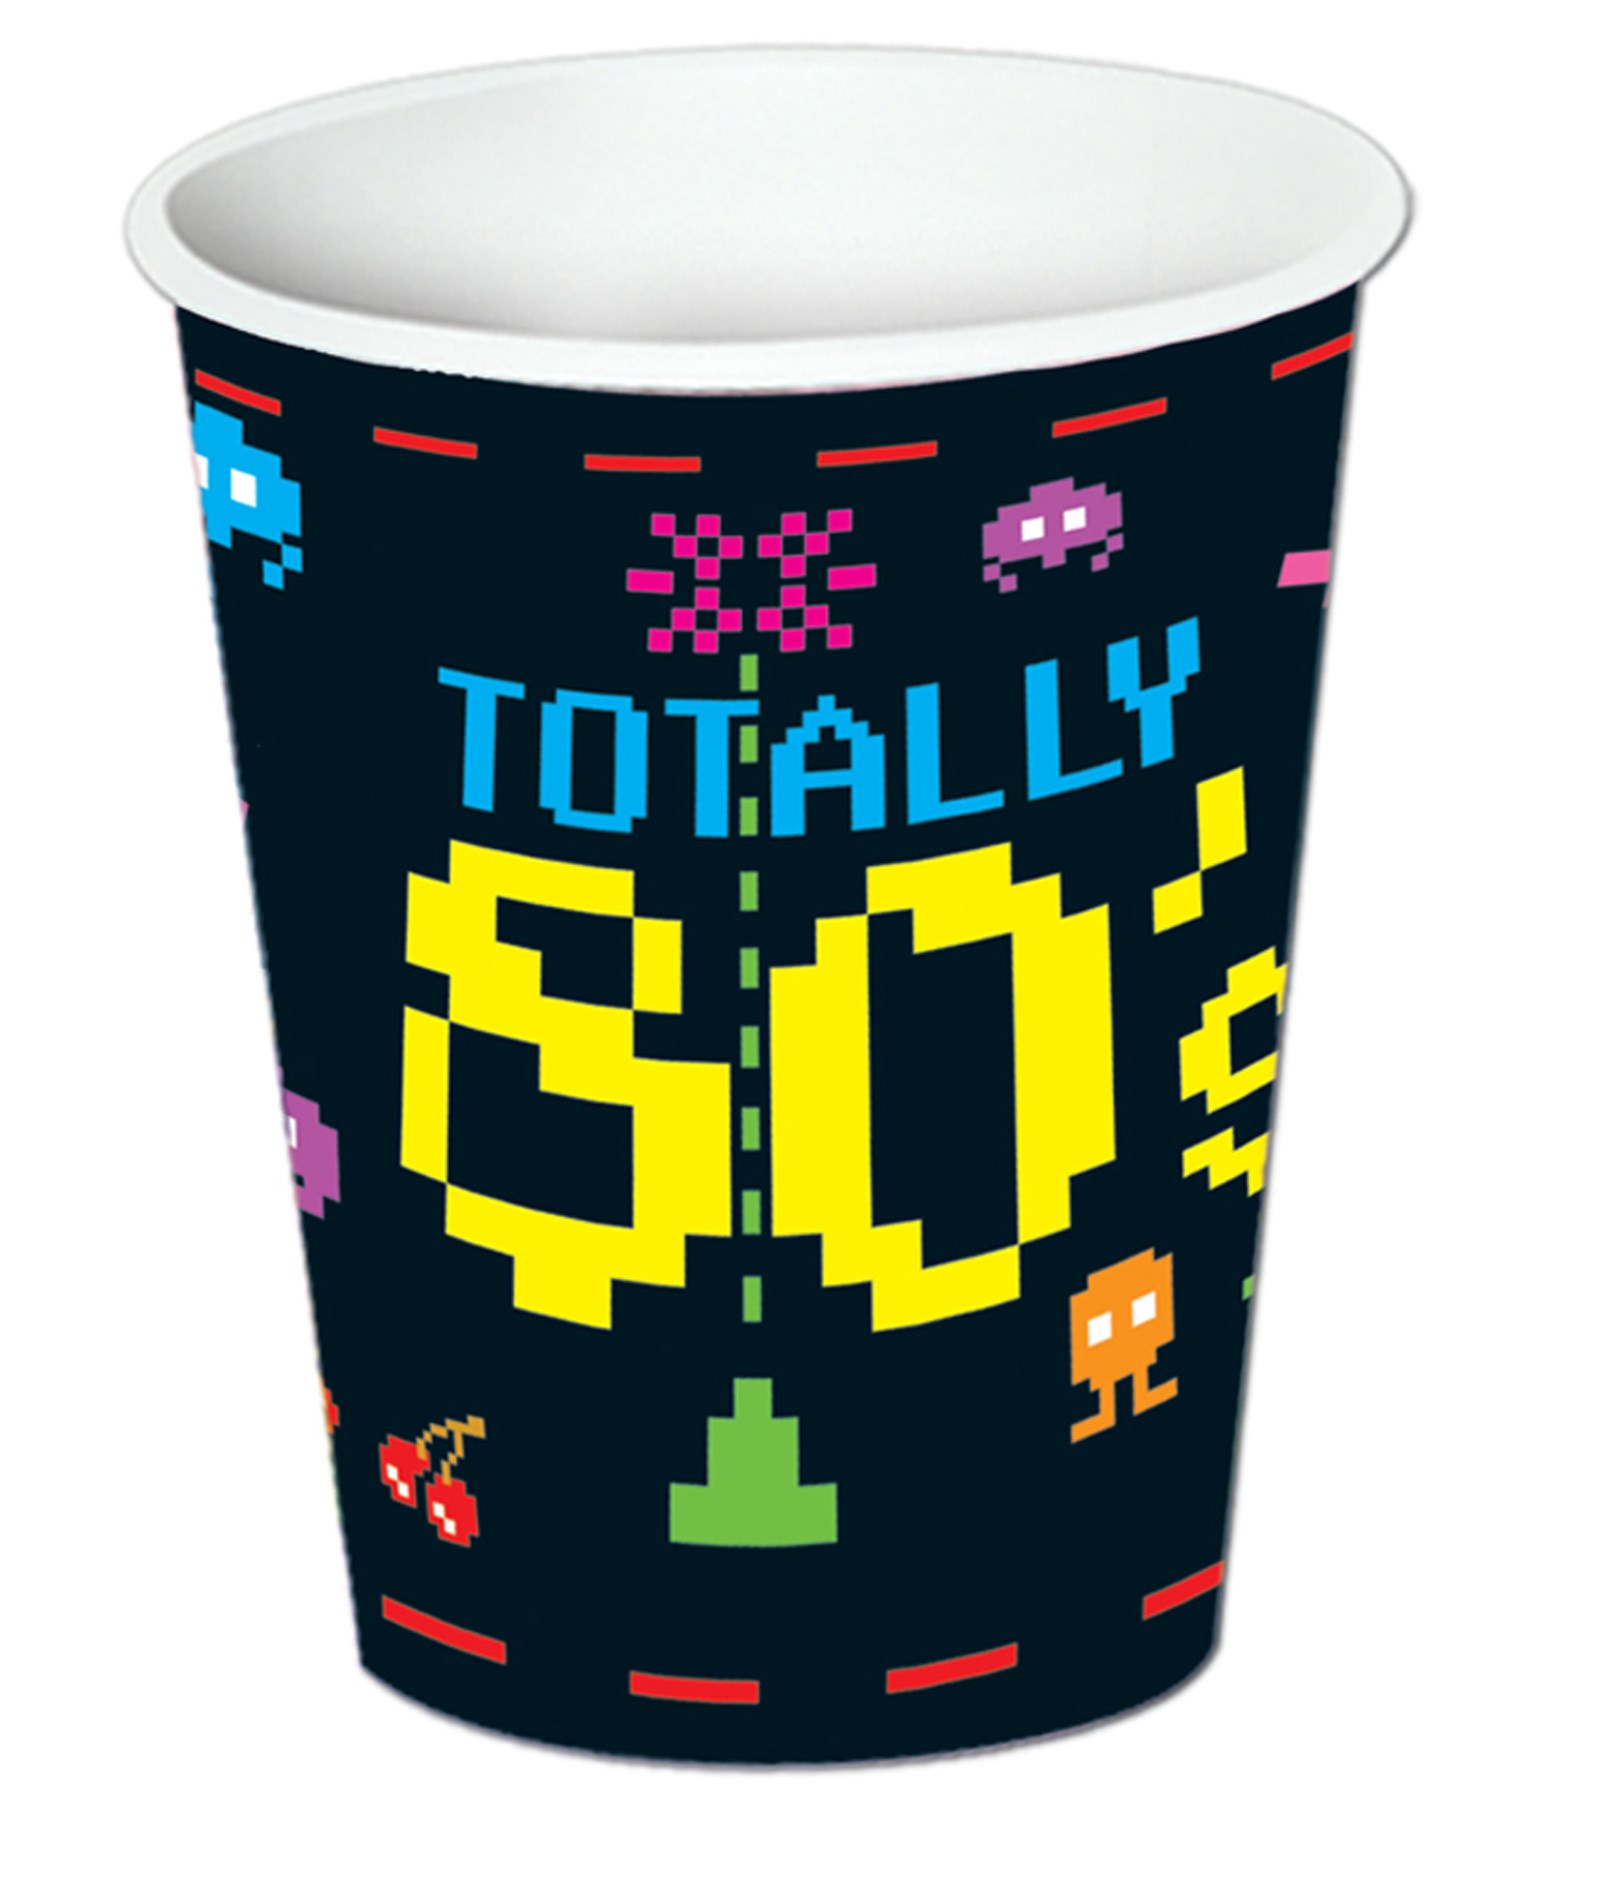 Totally 80s – 9 oz. Paper Cups 8 count